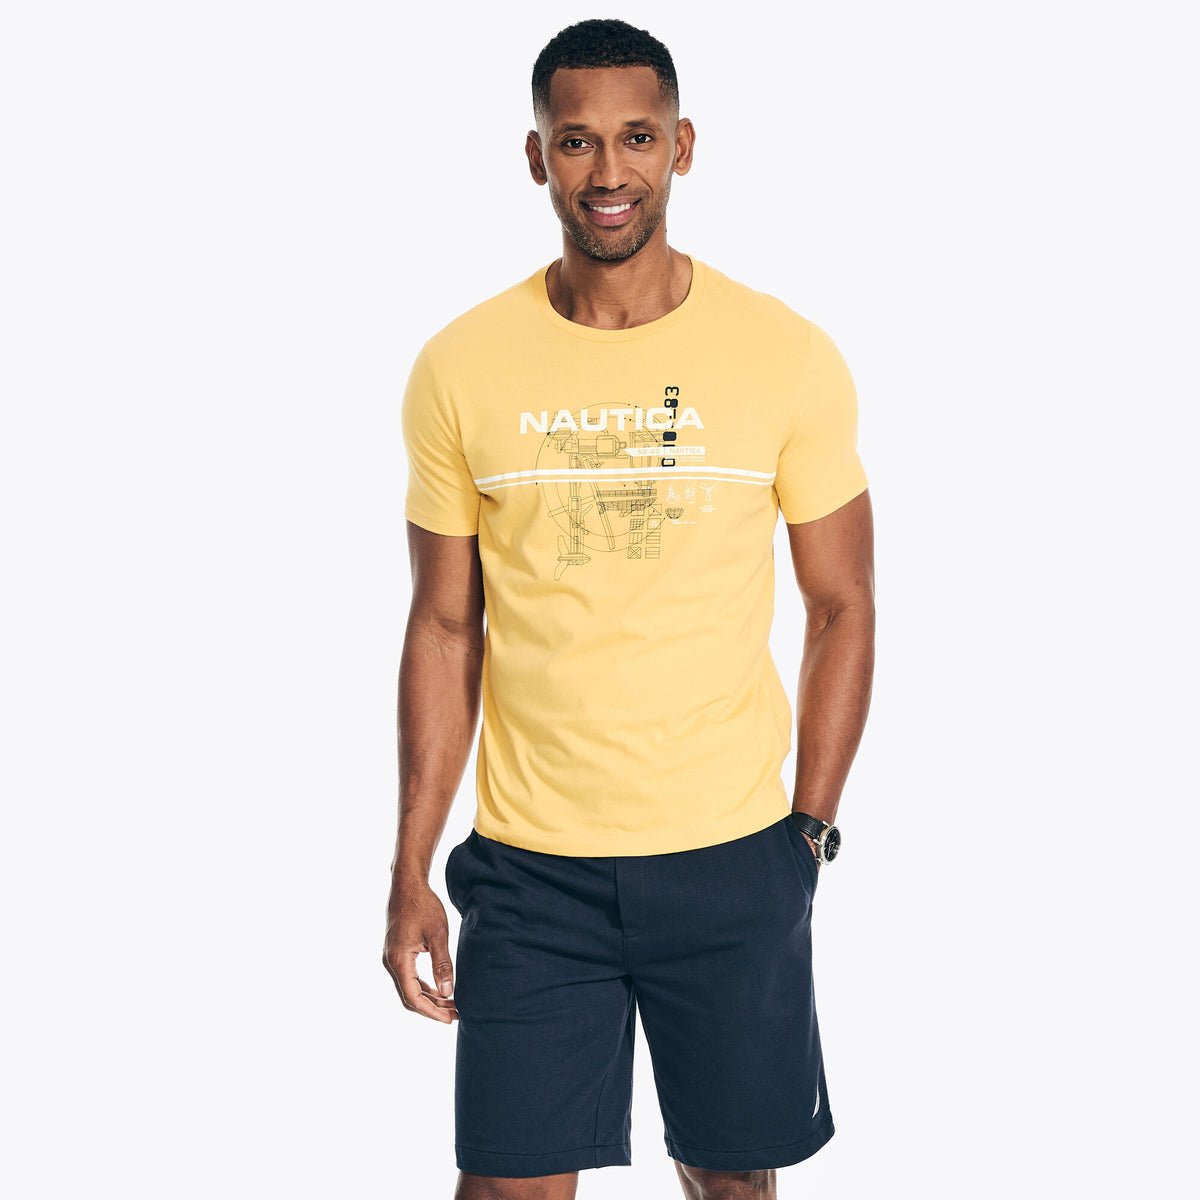 Nautica Men's Big & Tall Sustainably Crafted Ns-83 Graphic T-Shirt Buoy Yellow